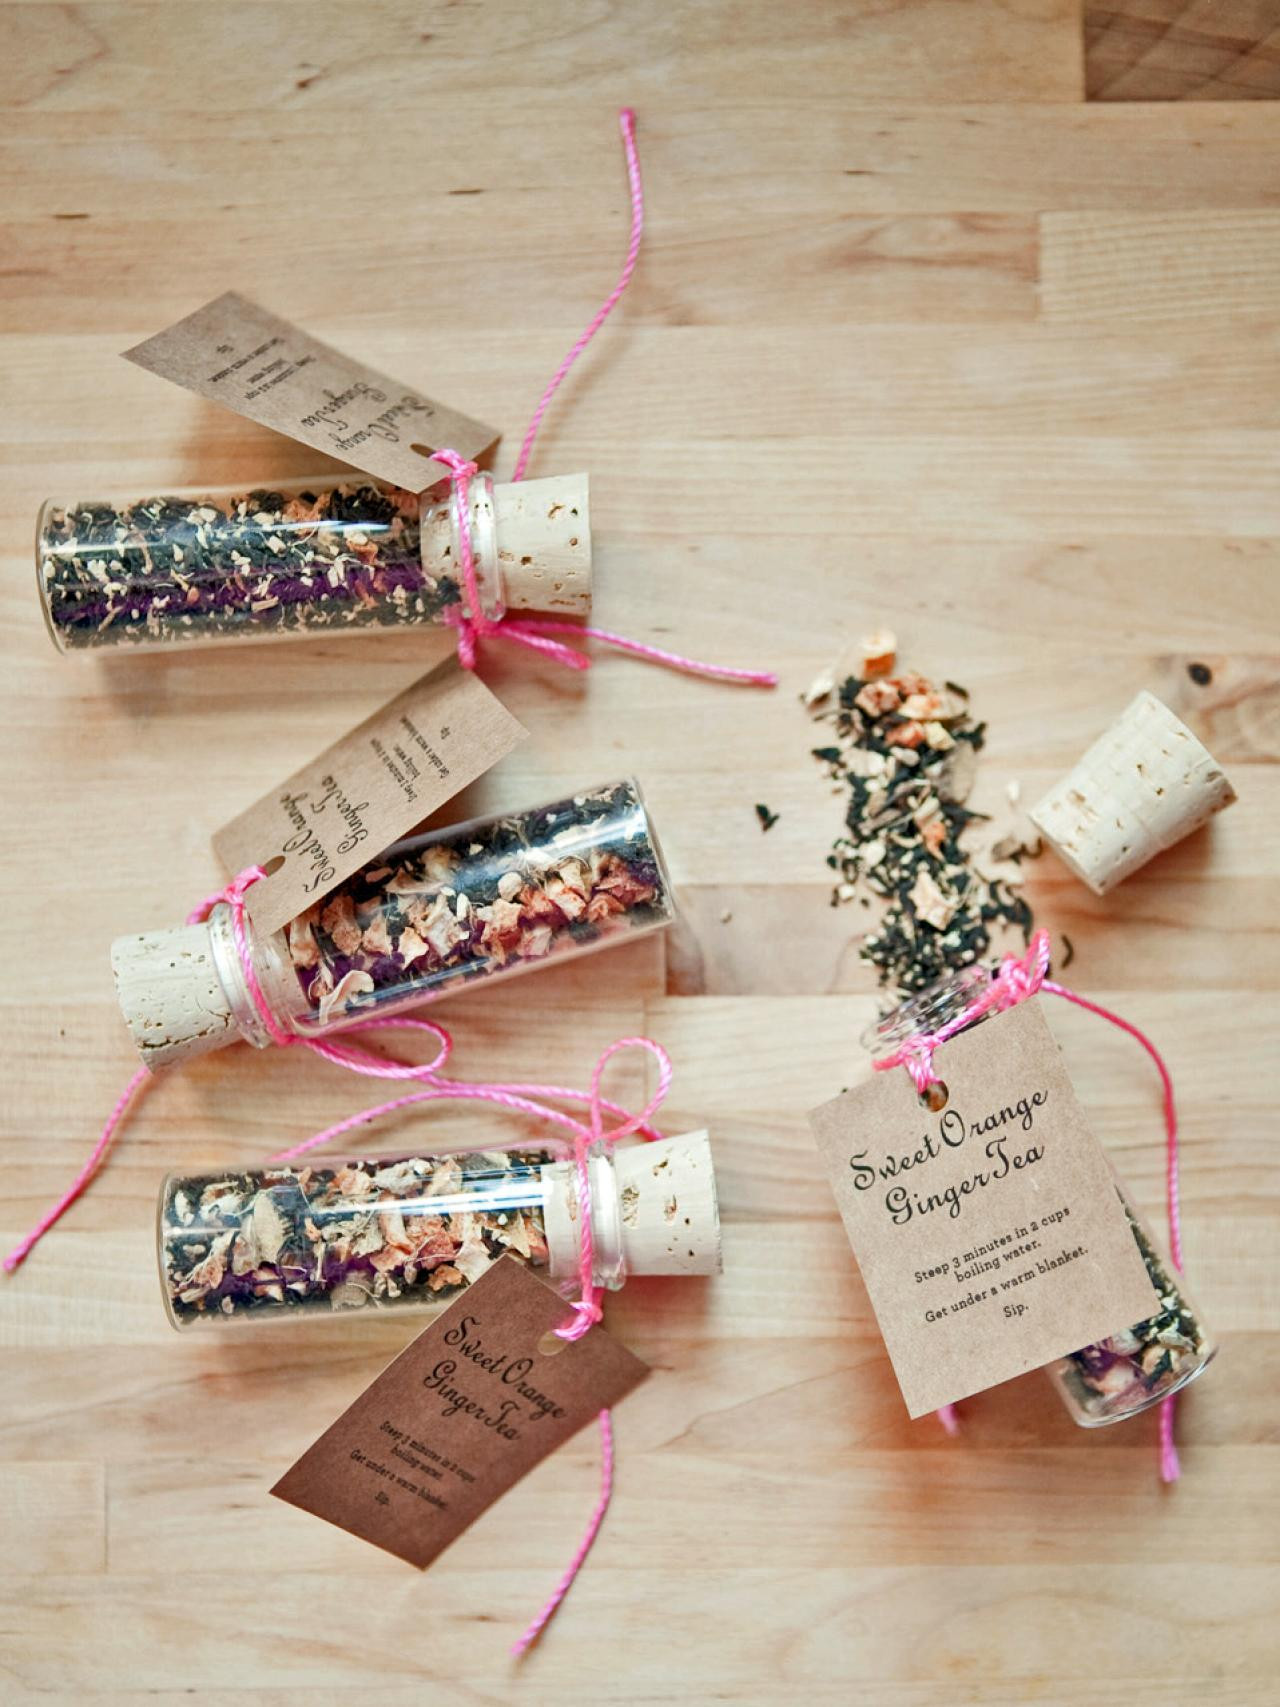 Holiday Party Gifts Ideas
 30 Festive DIY Holiday Party Favors